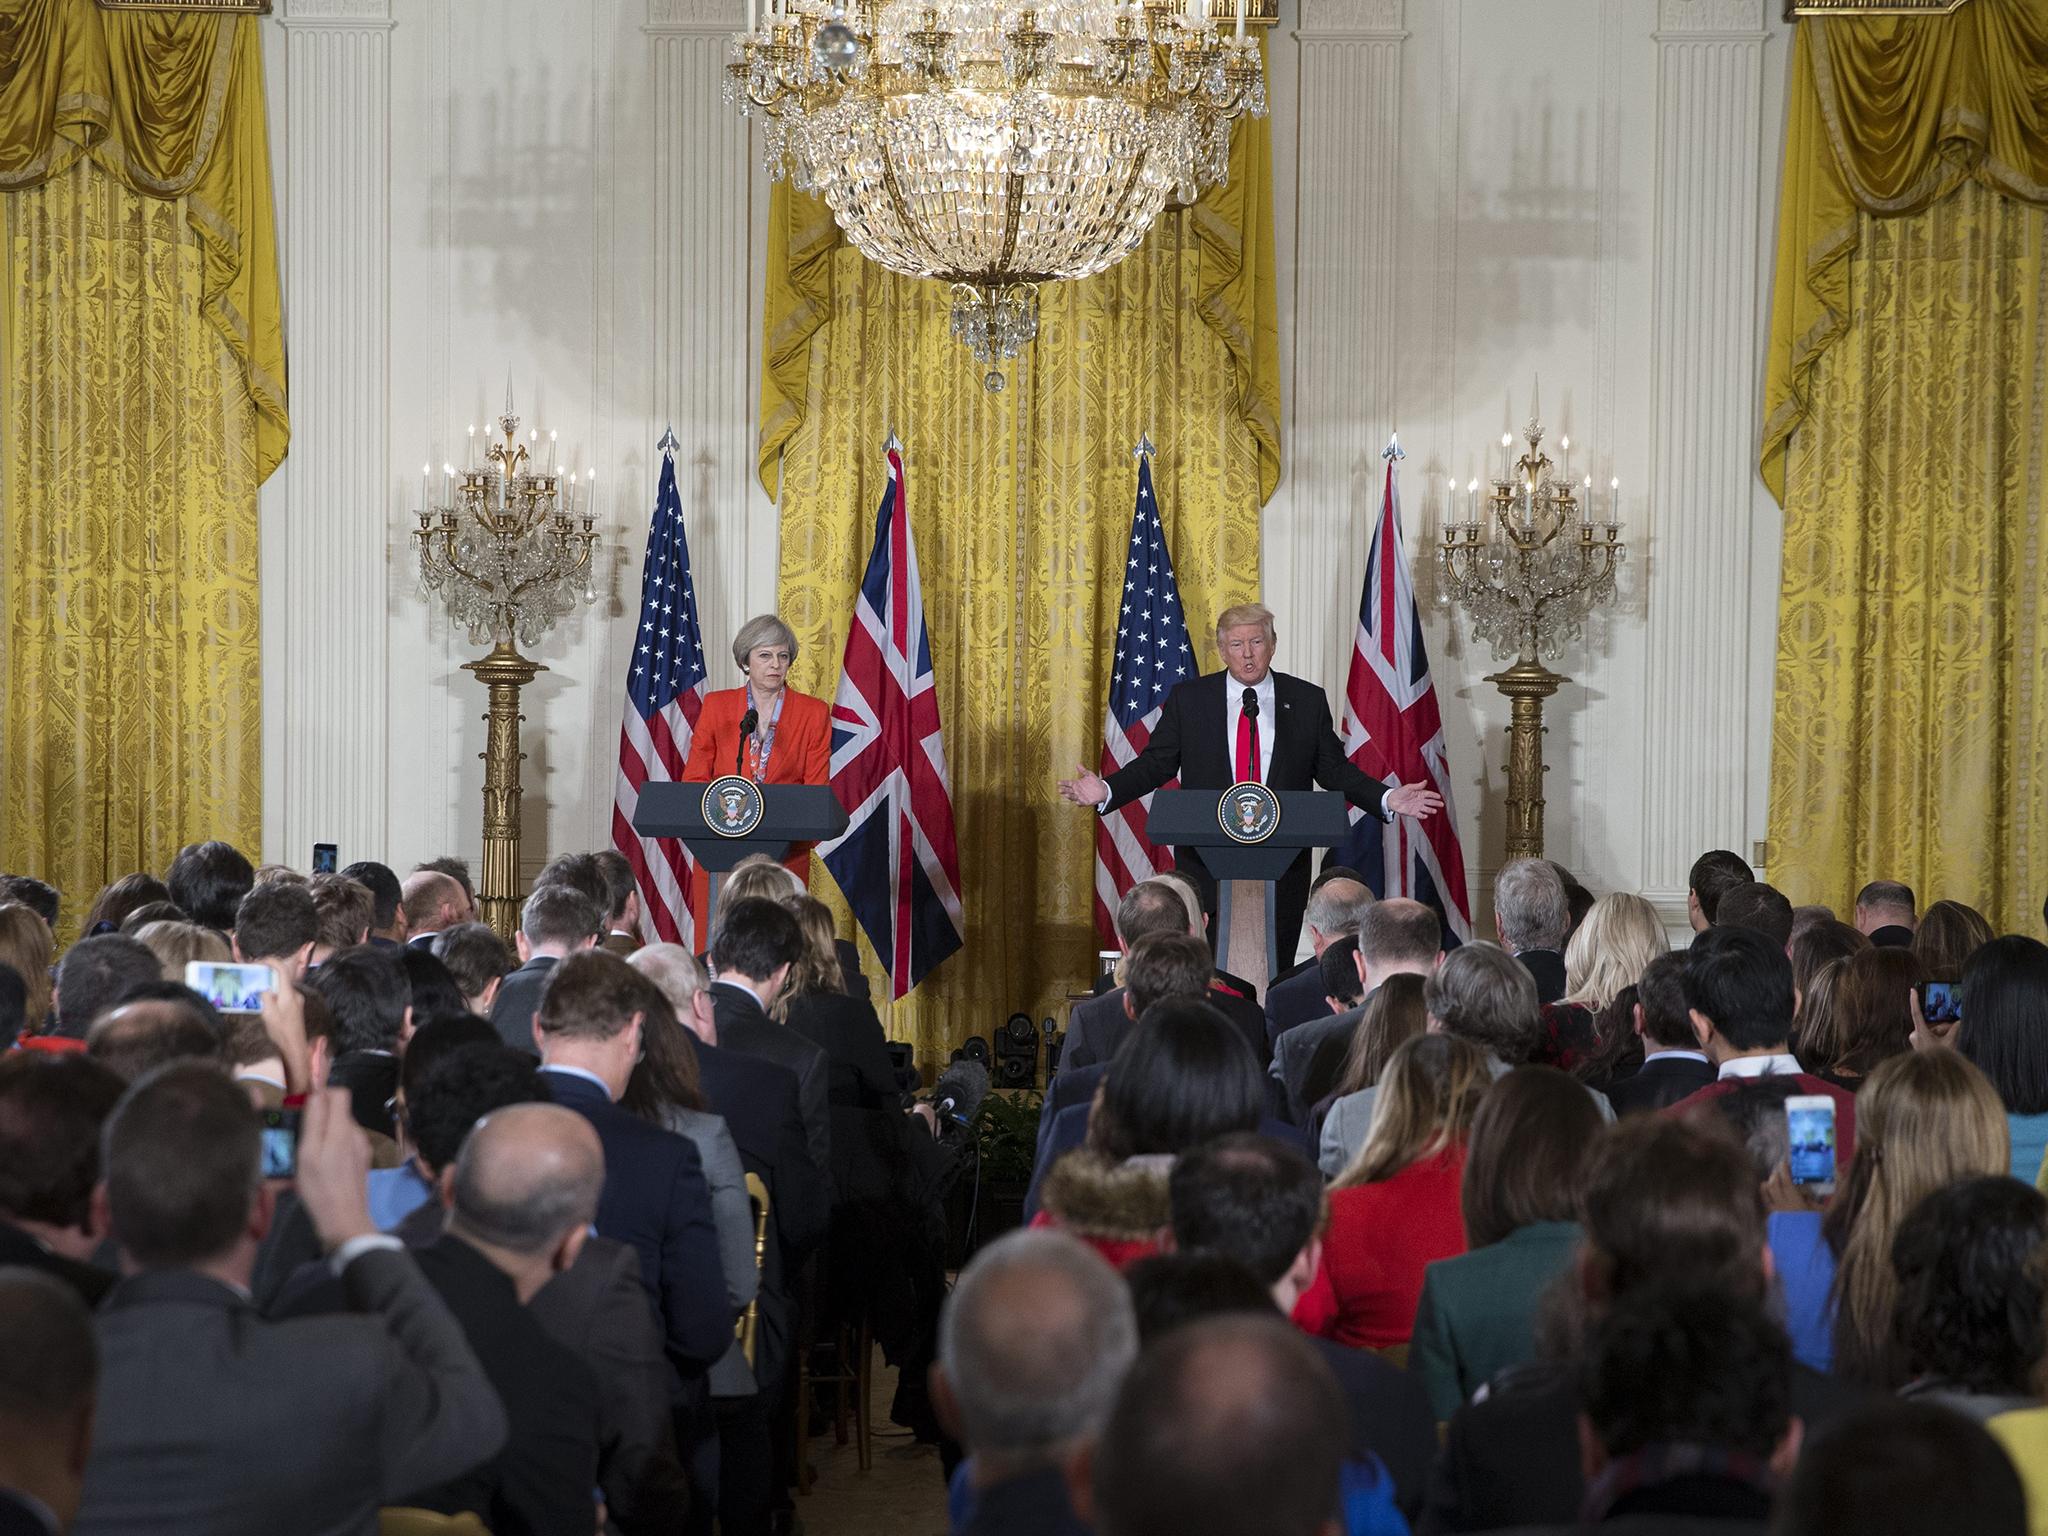 Political journalism, as opposed to diplomacy, was to the fore at the White House on Friday